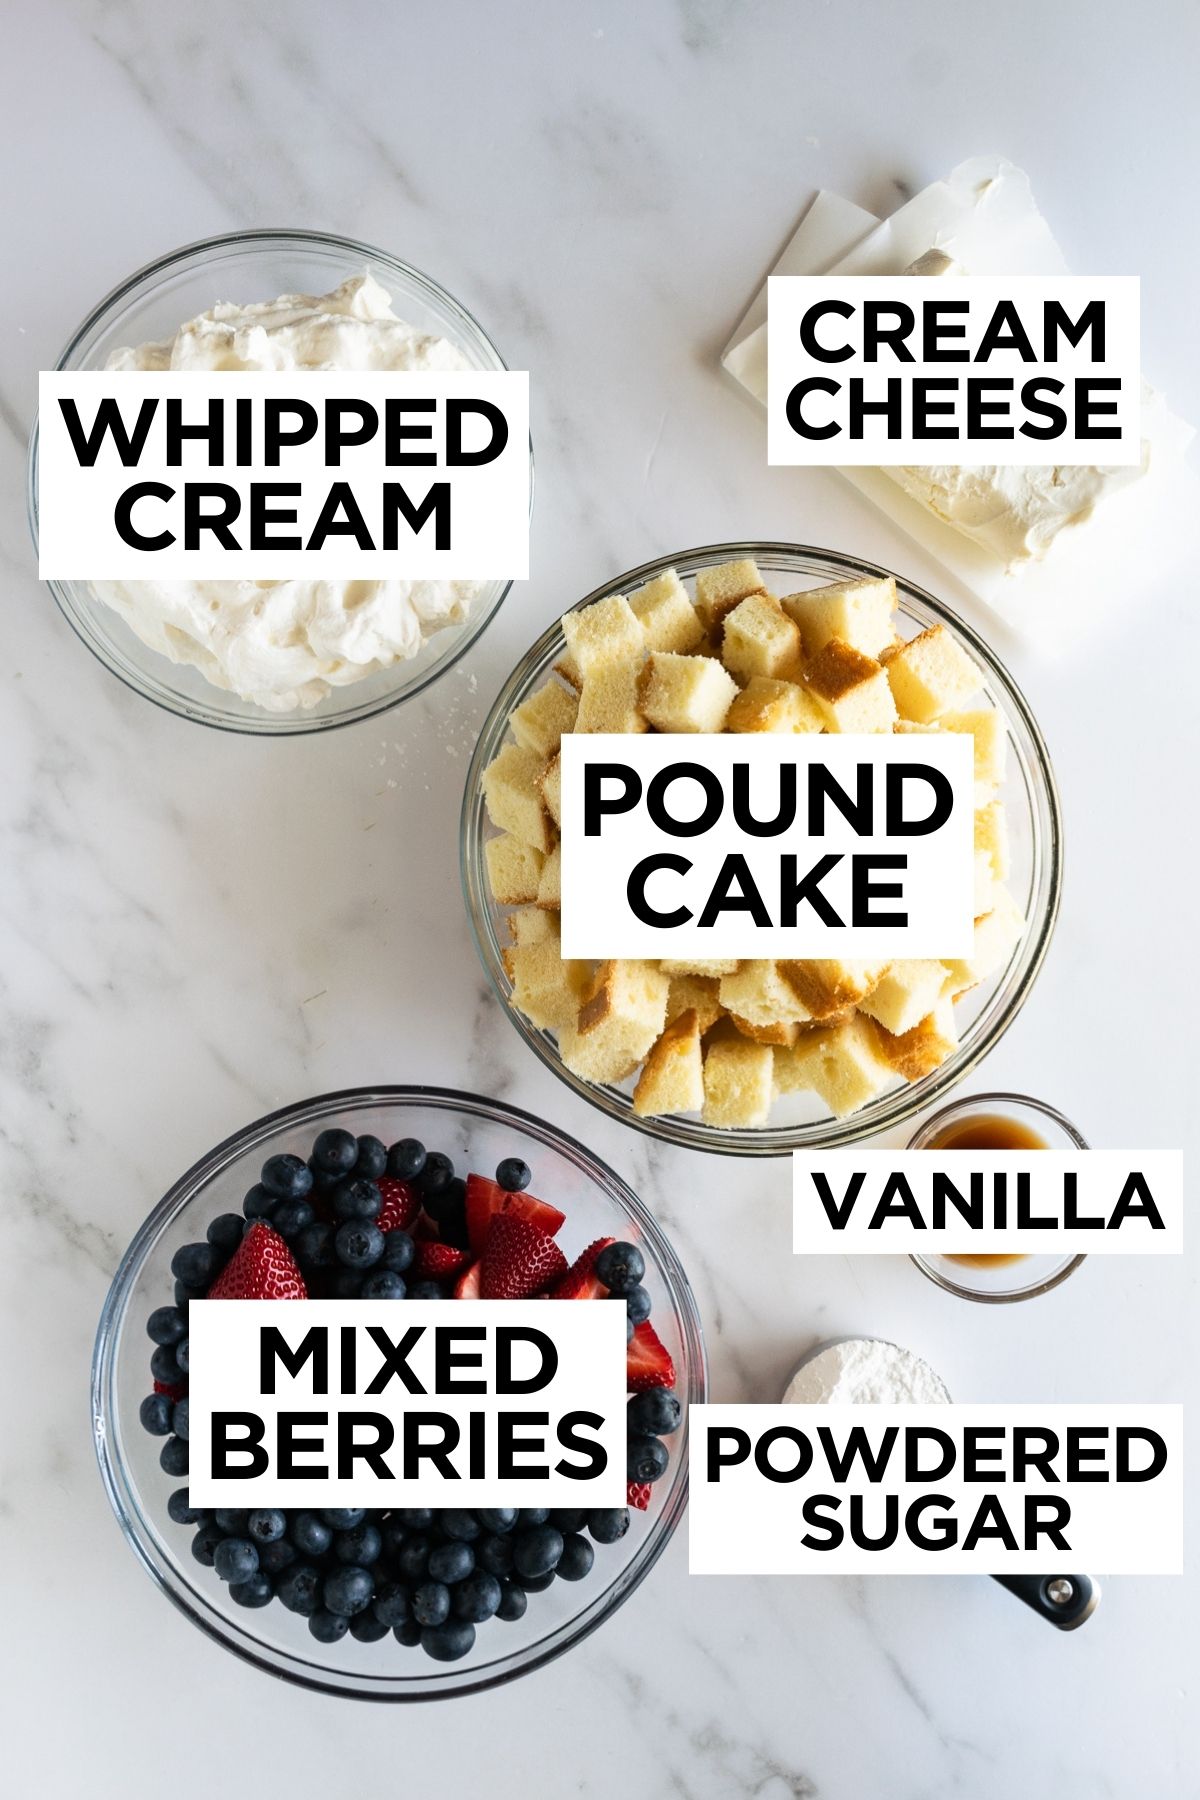 ingredients for berry trifle in bowls such as pound cake, cream cheese, vanilla, sugar, whipped cream and berries.